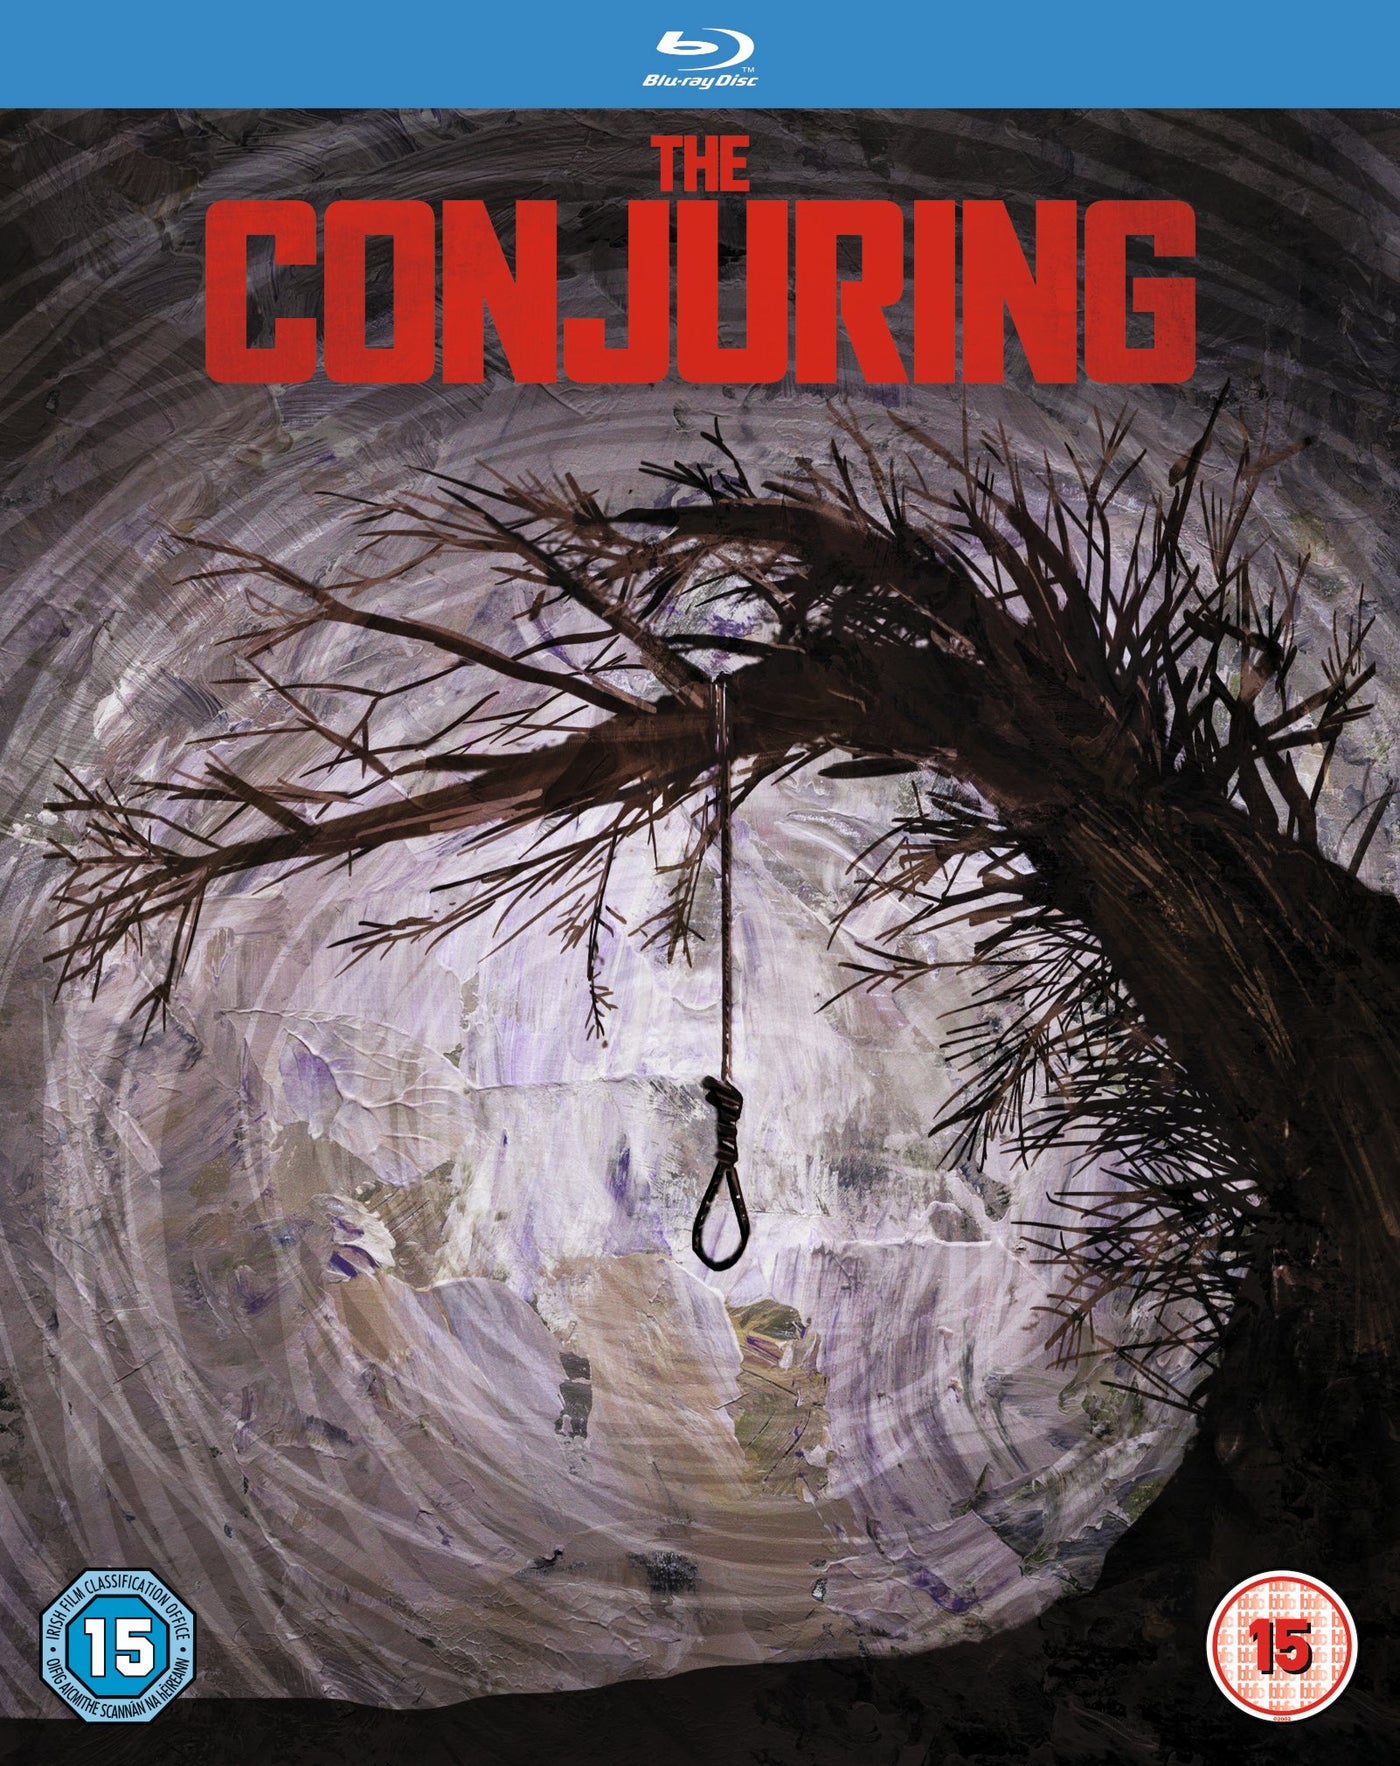 The Conjuring [2013] (Blu-ray)